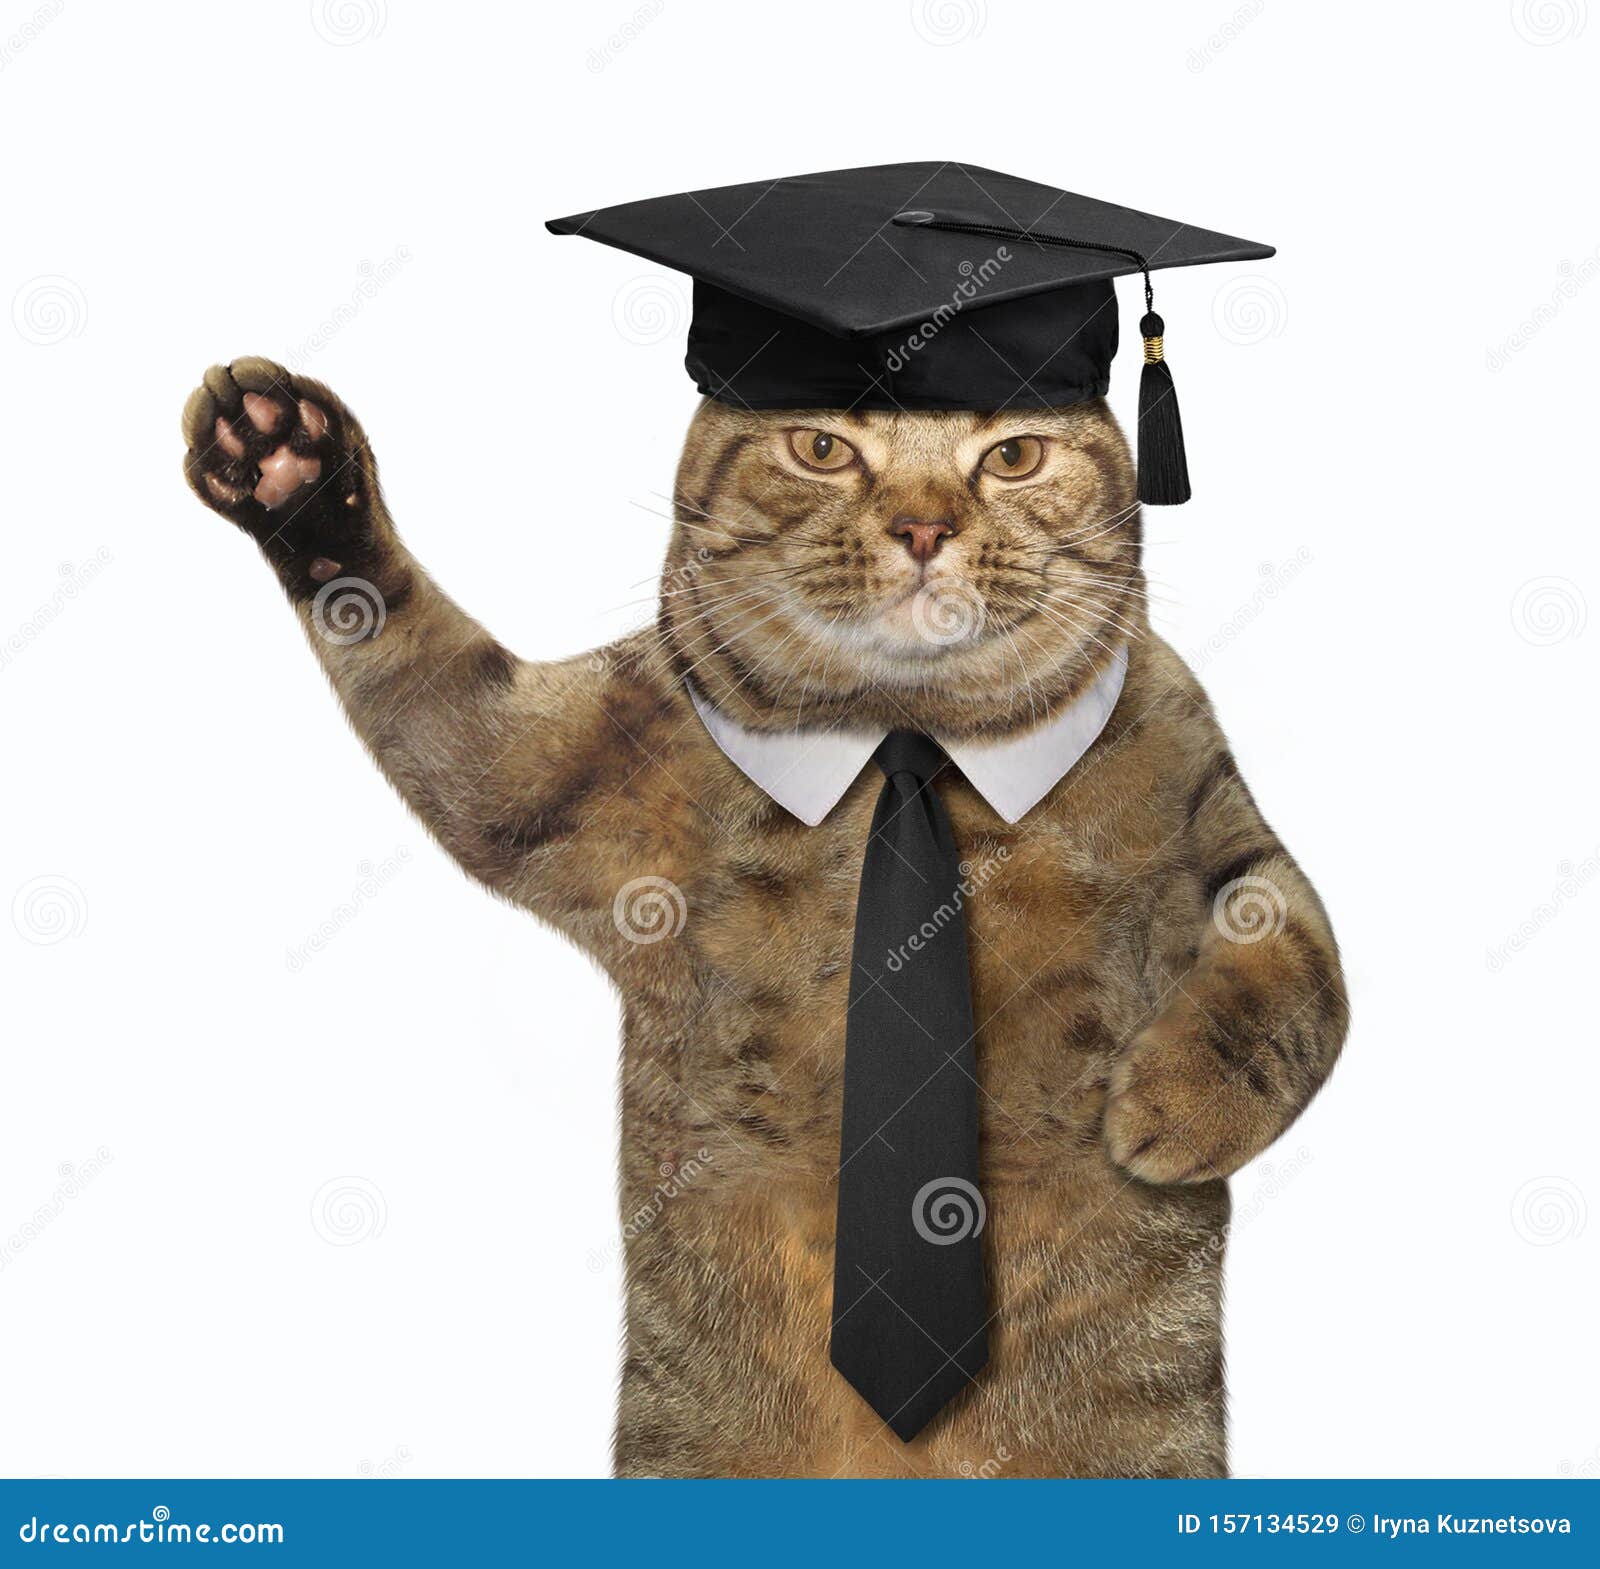  Cat  Student  In A Academic Hat Stock Image Image of 